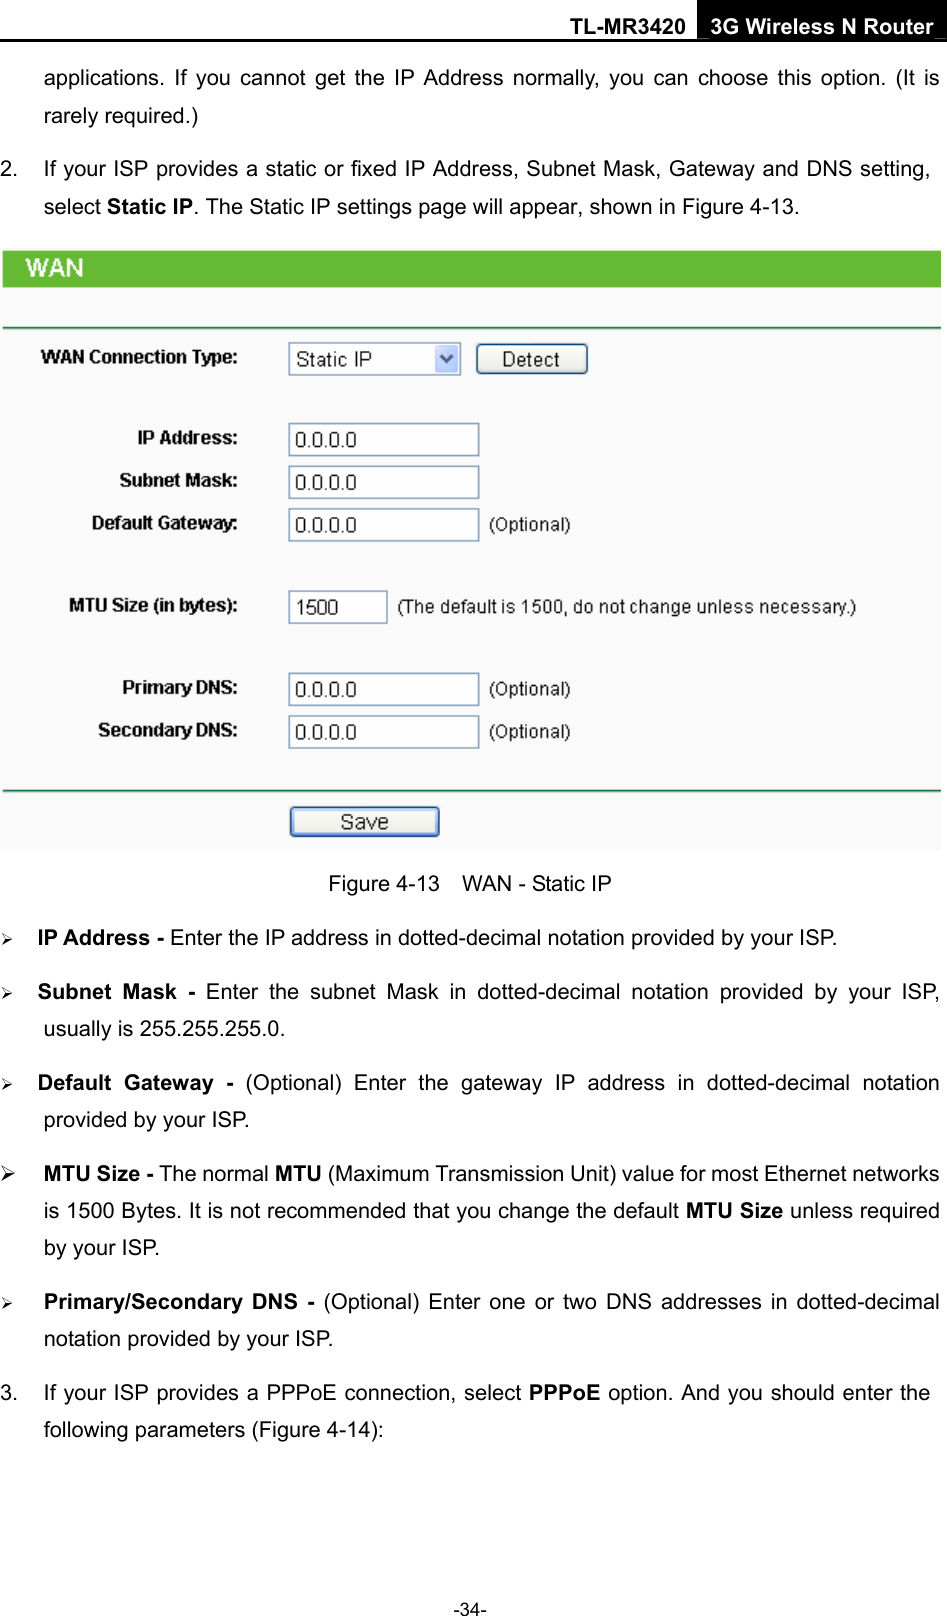 TL-MR3420 3G Wireless N Router -34- applications. If you cannot get the IP Address normally, you can choose this option. (It is rarely required.) 2.  If your ISP provides a static or fixed IP Address, Subnet Mask, Gateway and DNS setting, select Static IP. The Static IP settings page will appear, shown in Figure 4-13.  Figure 4-13    WAN - Static IP ¾ IP Address - Enter the IP address in dotted-decimal notation provided by your ISP. ¾ Subnet Mask - Enter the subnet Mask in dotted-decimal notation provided by your ISP, usually is 255.255.255.0. ¾ Default Gateway - (Optional) Enter the gateway IP address in dotted-decimal notation provided by your ISP. ¾ MTU Size - The normal MTU (Maximum Transmission Unit) value for most Ethernet networks is 1500 Bytes. It is not recommended that you change the default MTU Size unless required by your ISP. ¾ Primary/Secondary DNS - (Optional) Enter one or two DNS addresses in dotted-decimal notation provided by your ISP. 3.  If your ISP provides a PPPoE connection, select PPPoE option. And you should enter the following parameters (Figure 4-14): 